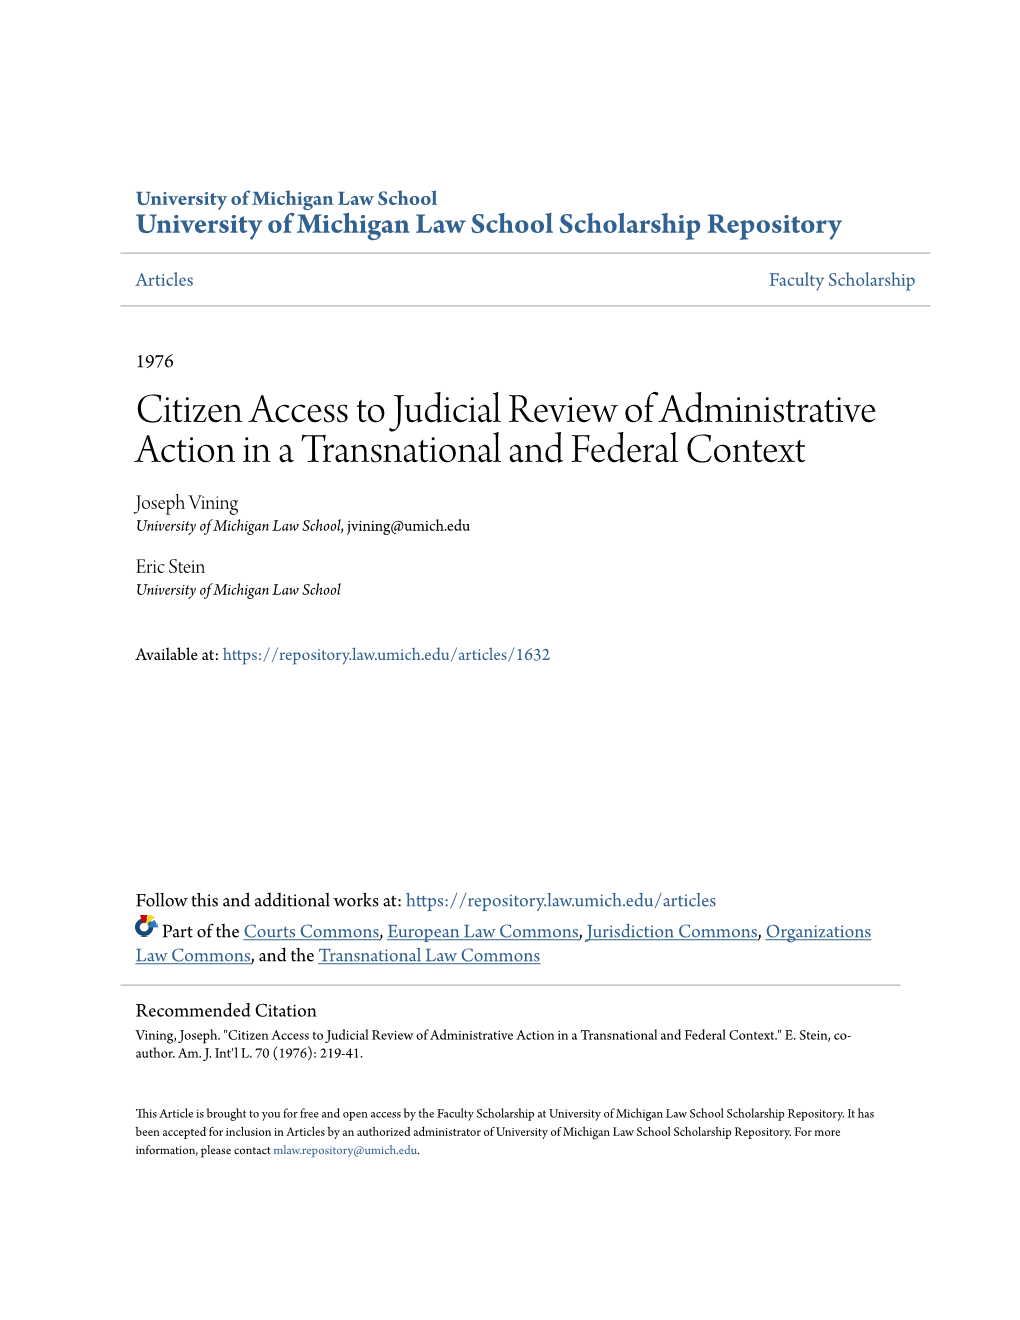 Citizen Access to Judicial Review of Administrative Action in a Transnational and Federal Context Joseph Vining University of Michigan Law School, Jvining@Umich.Edu